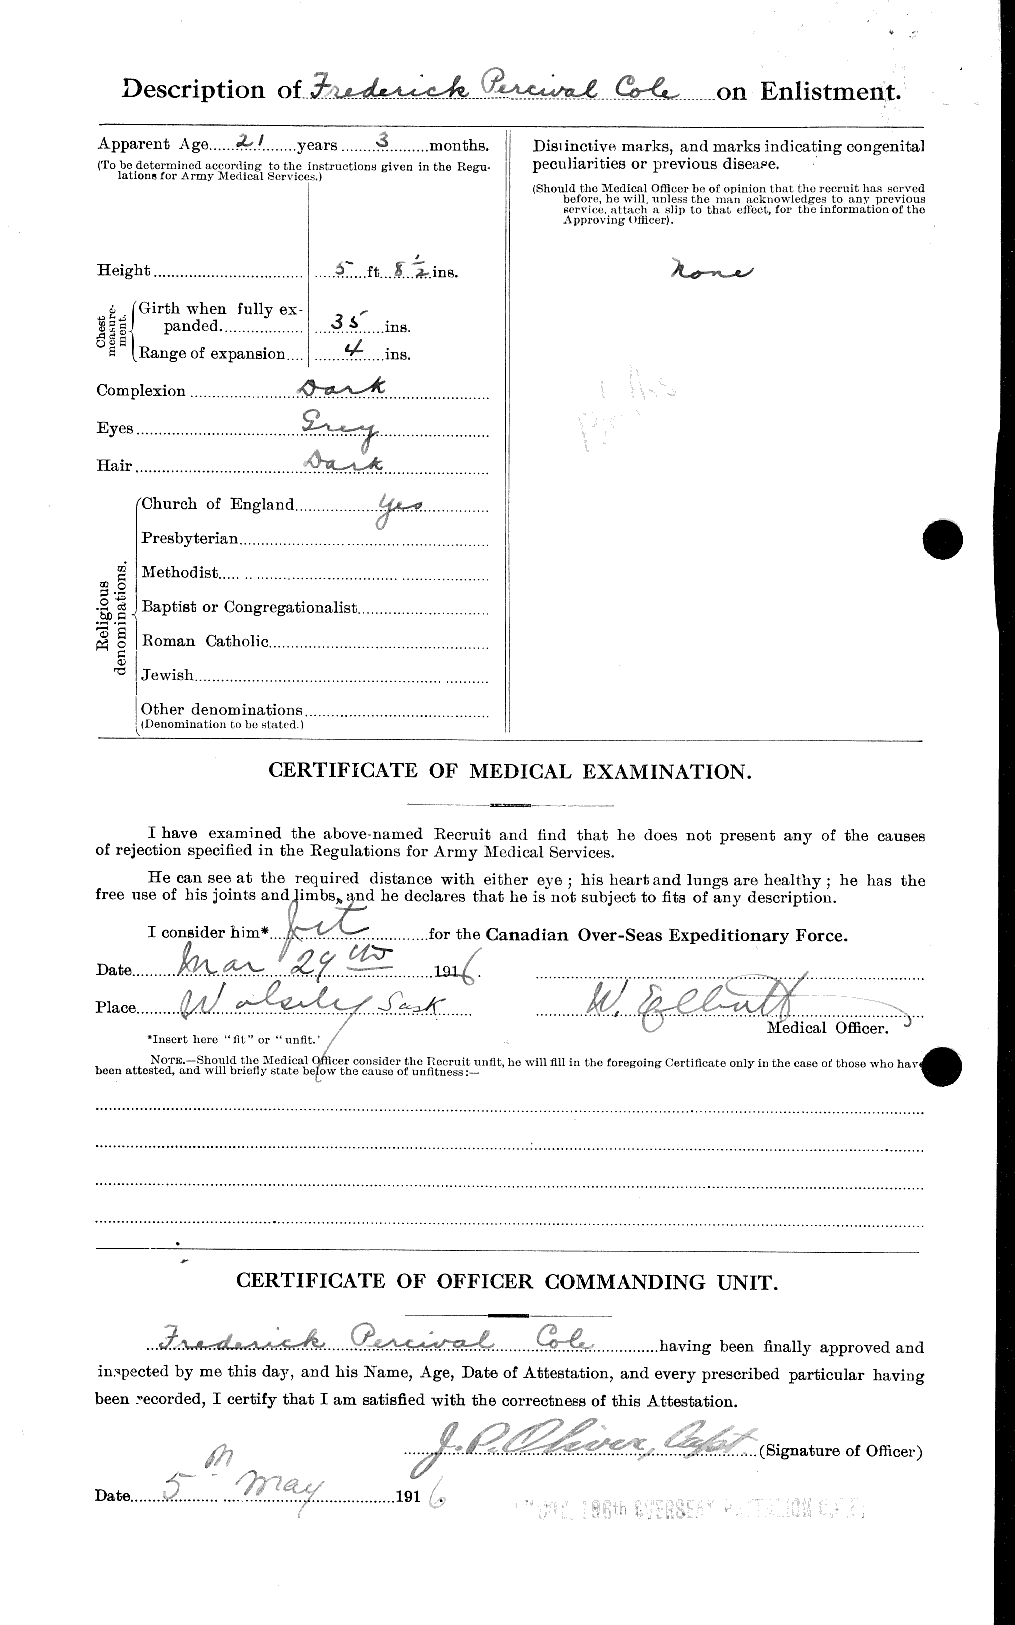 Personnel Records of the First World War - CEF 027742b